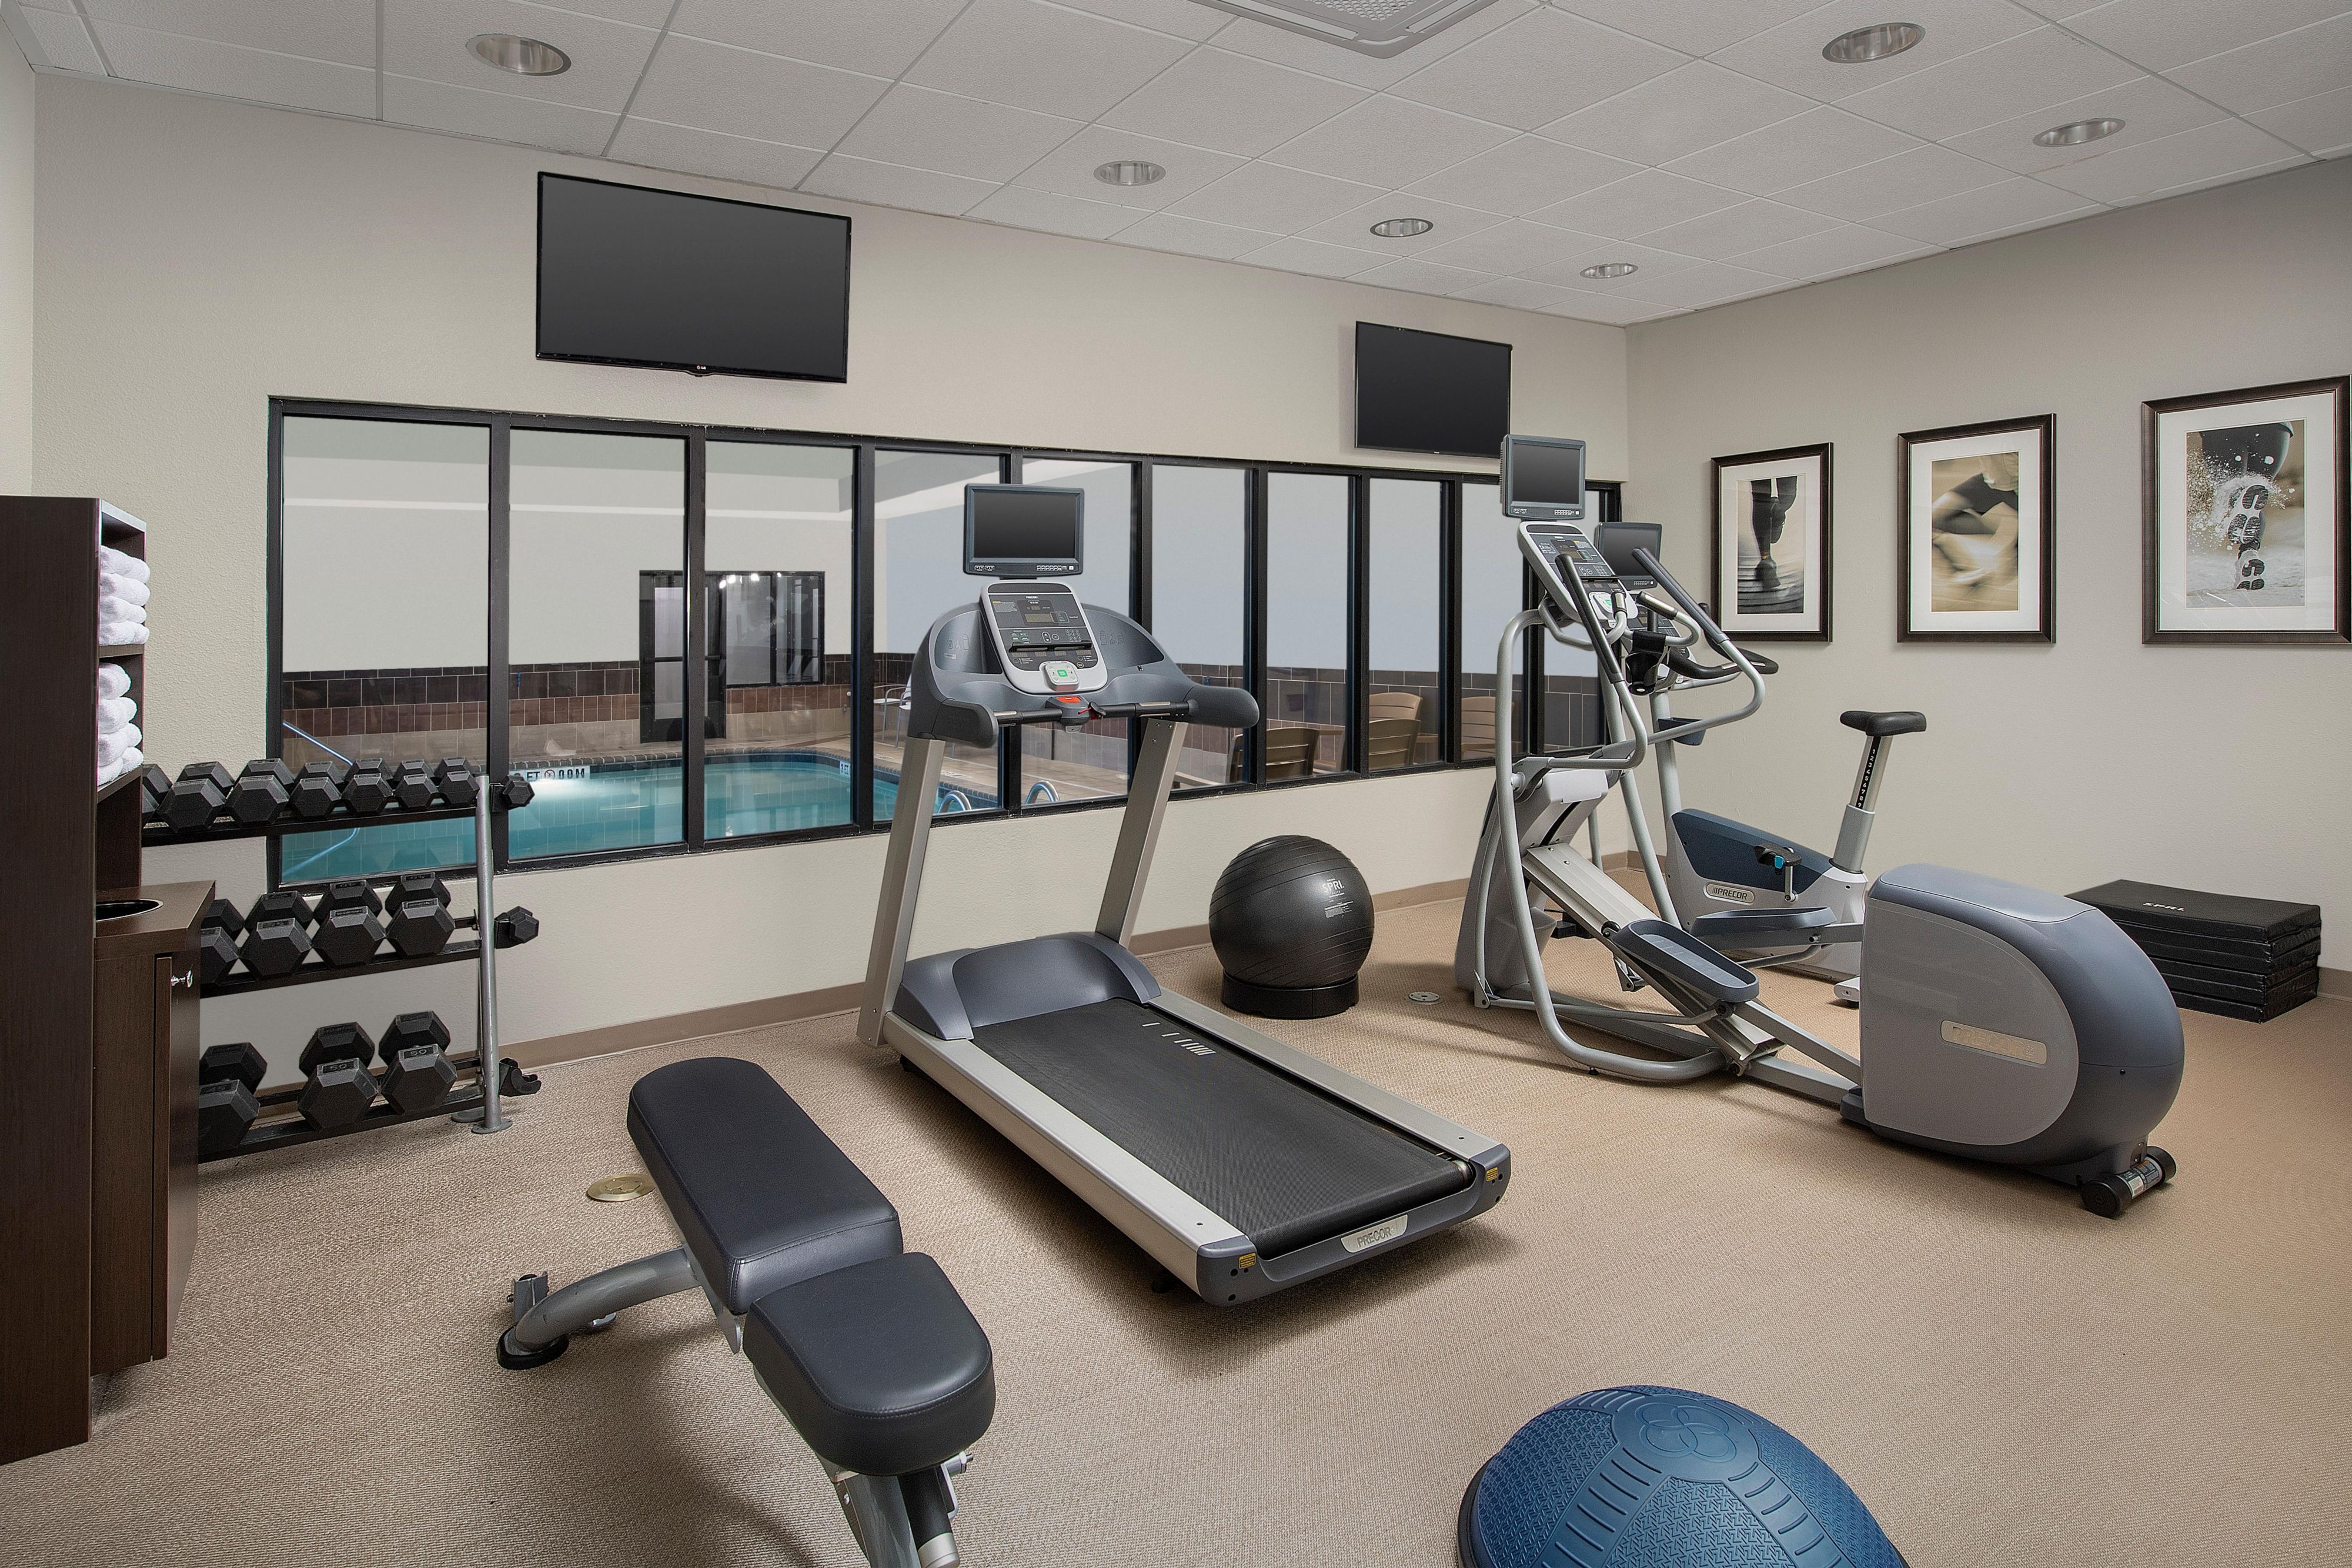 Staybridge Suites offers a state-of-the-art fitness facility 